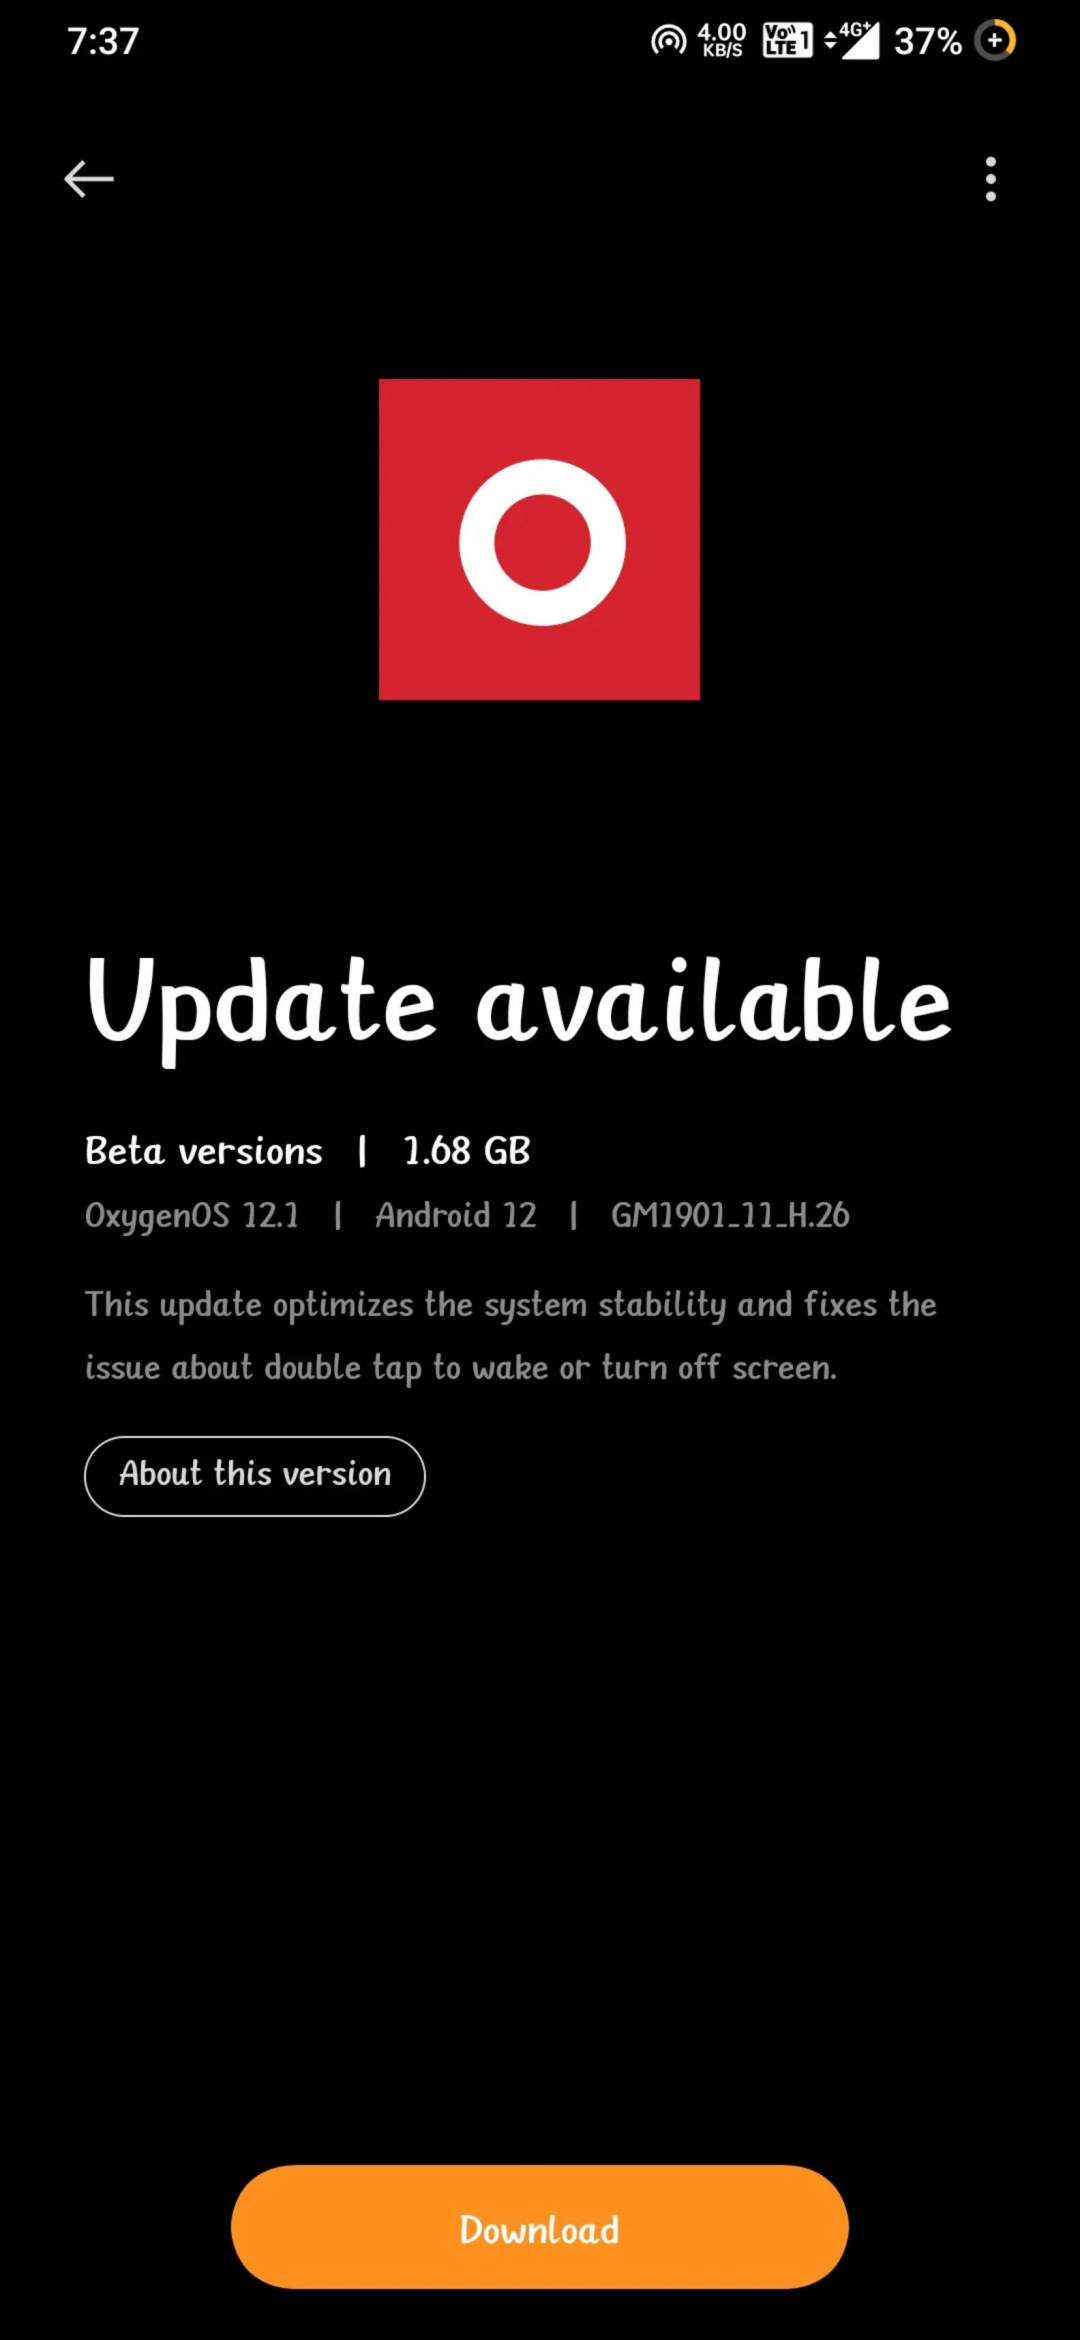 Oxygen OS 12.1 Open Beta 2 for the OnePlus 7 series